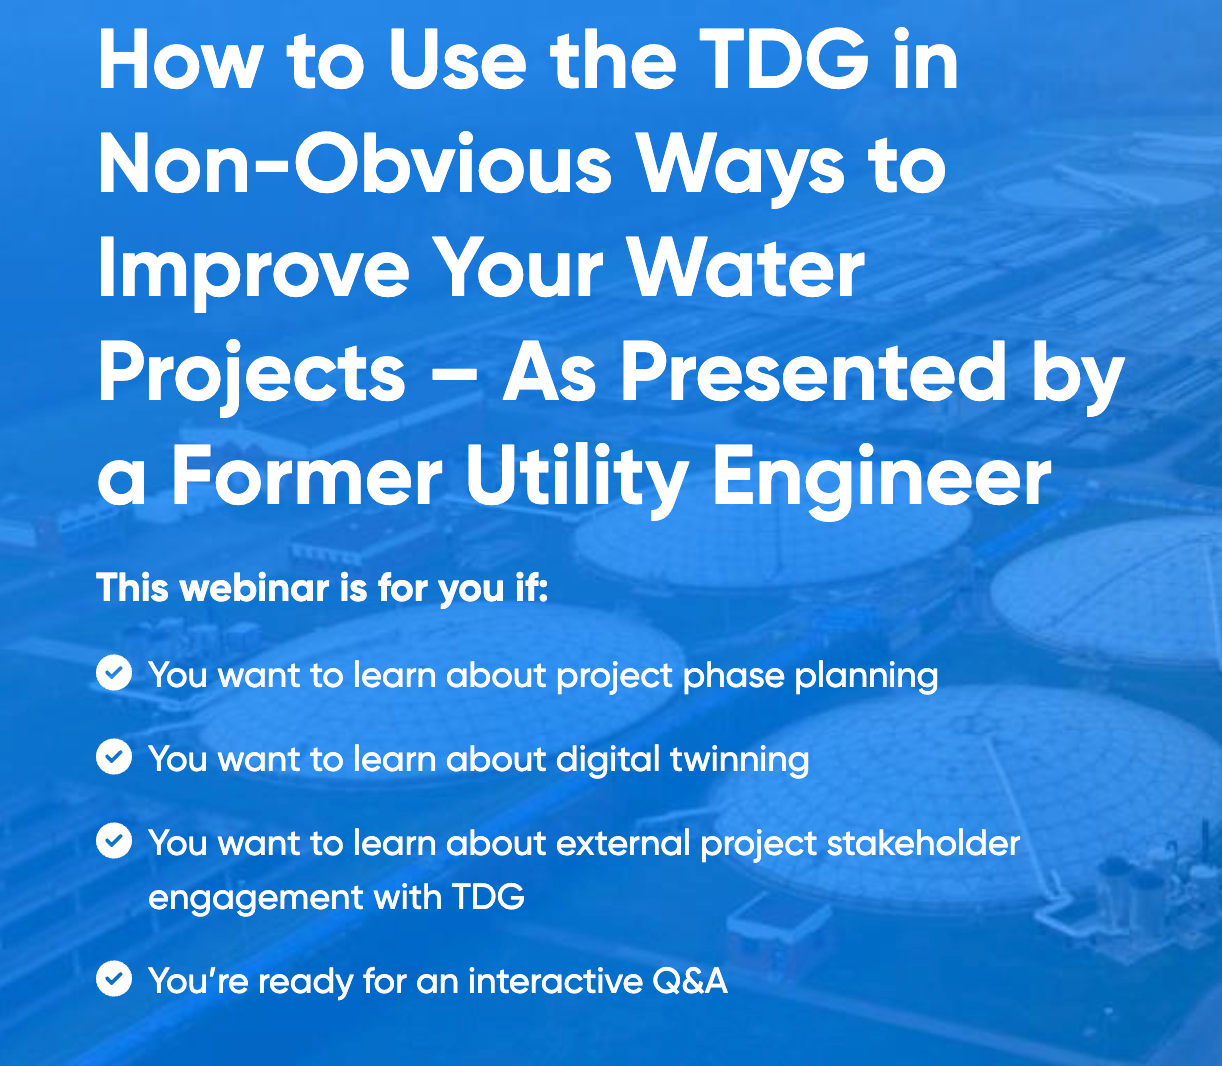 How to Use the Transcend Design Generator  in Non-Obvious Ways to Improve Your Water Projects